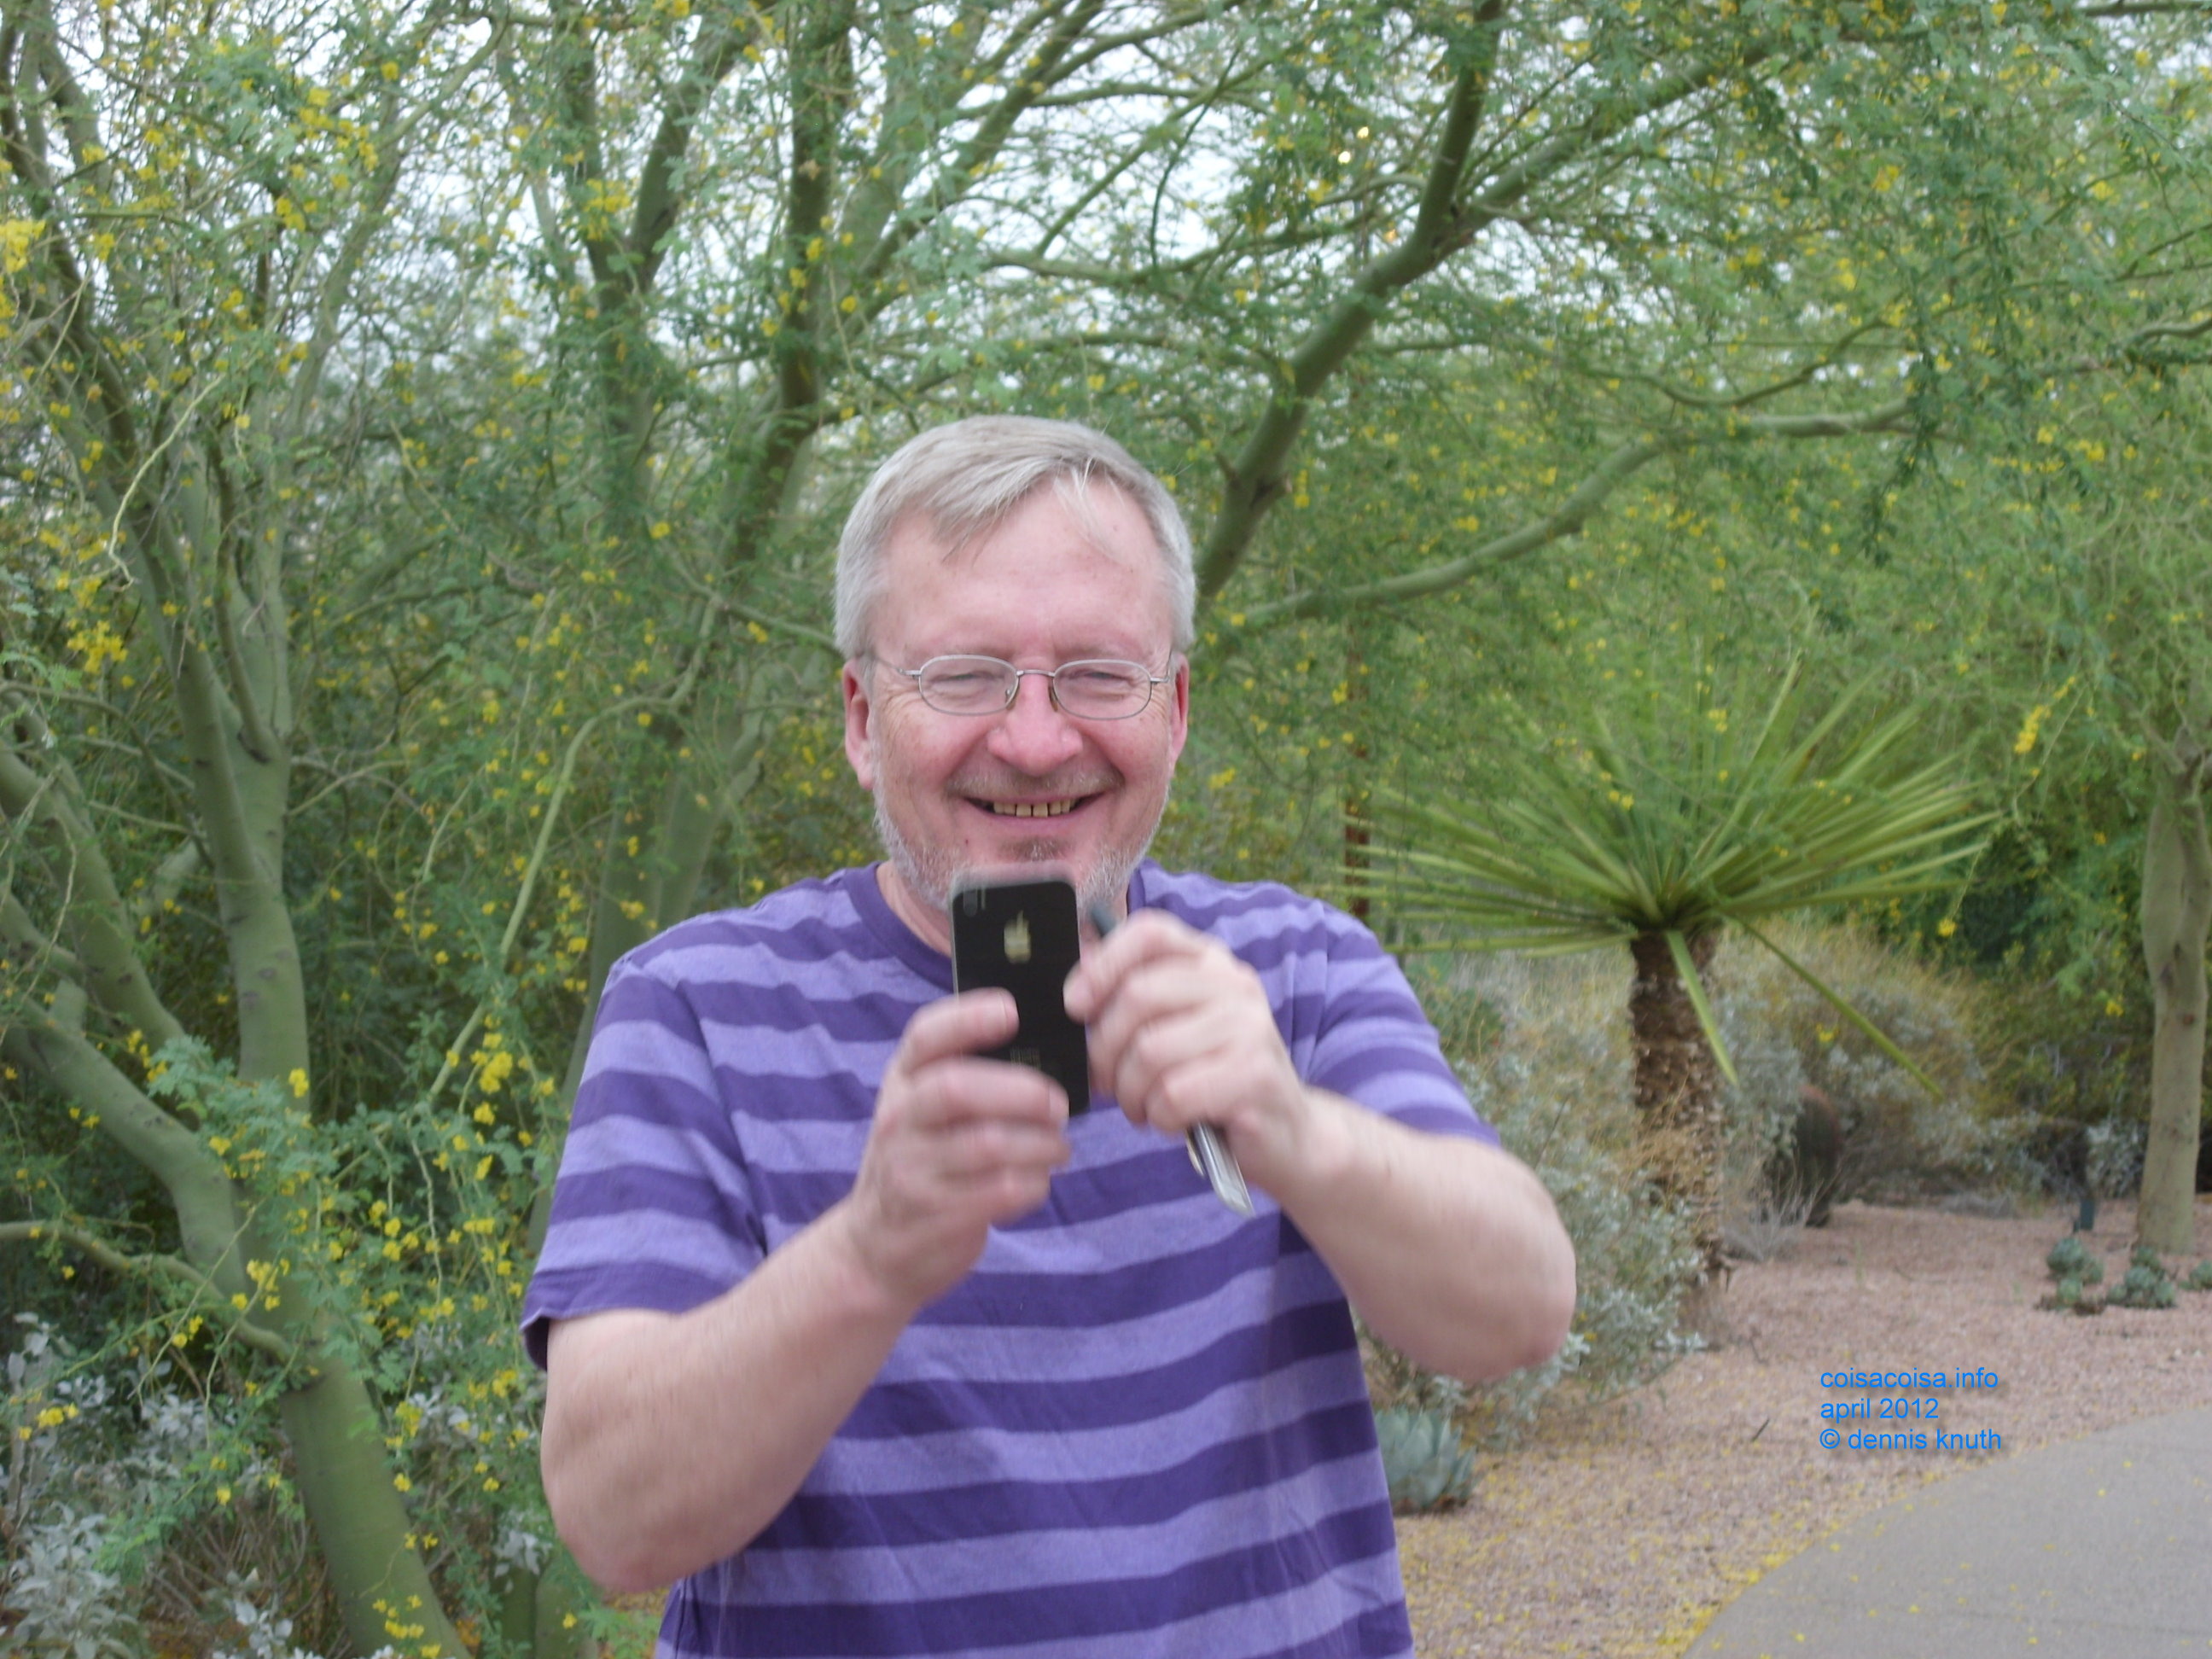 Dennis Knuth takes a photo with is iPhone in Phoenix